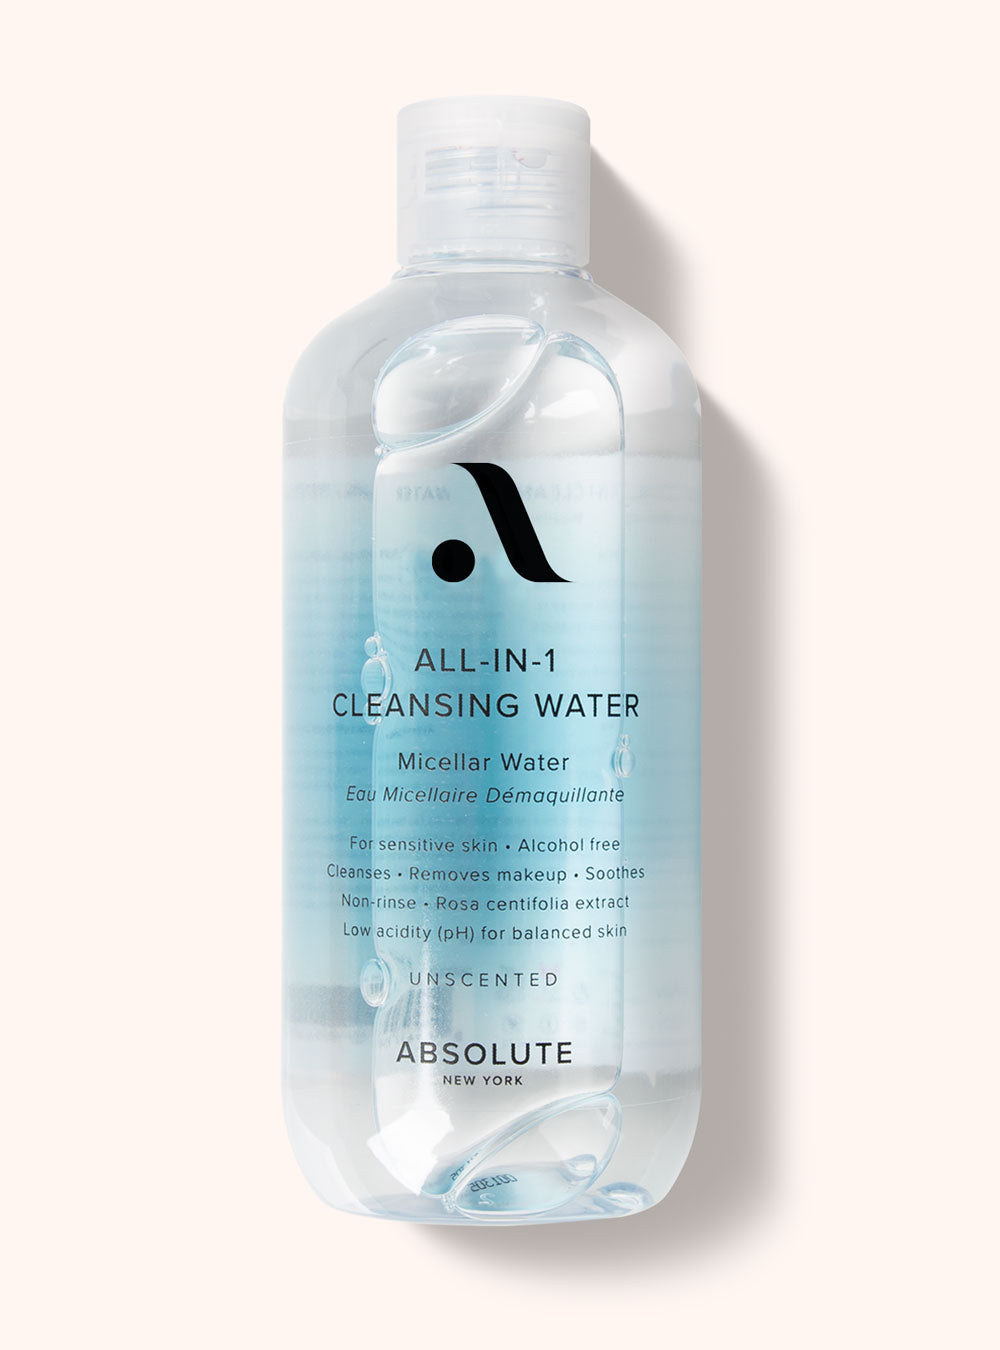 All-in-1 Cleansing Water || Unscented